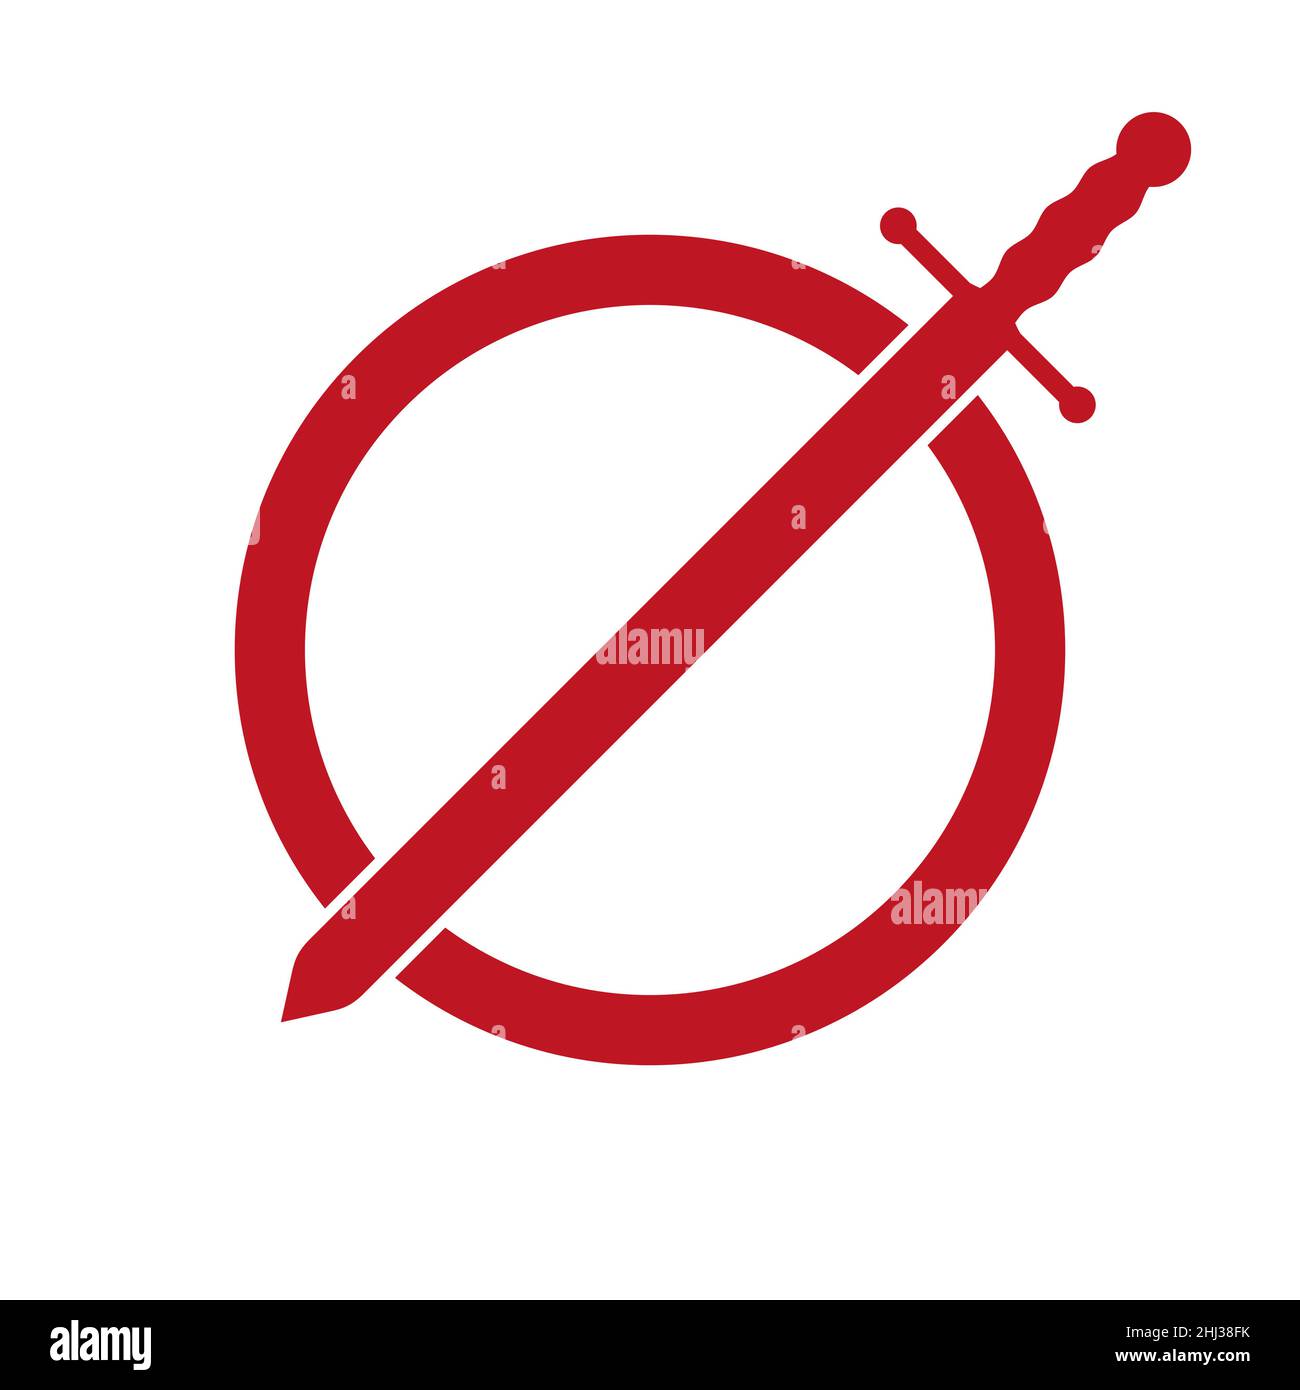 Strictly forbidden, the entrance to paradise is closed, a prohibition sign blocked by a sword. Military cordon, checkpoint. Flat vector illustration i Stock Vector